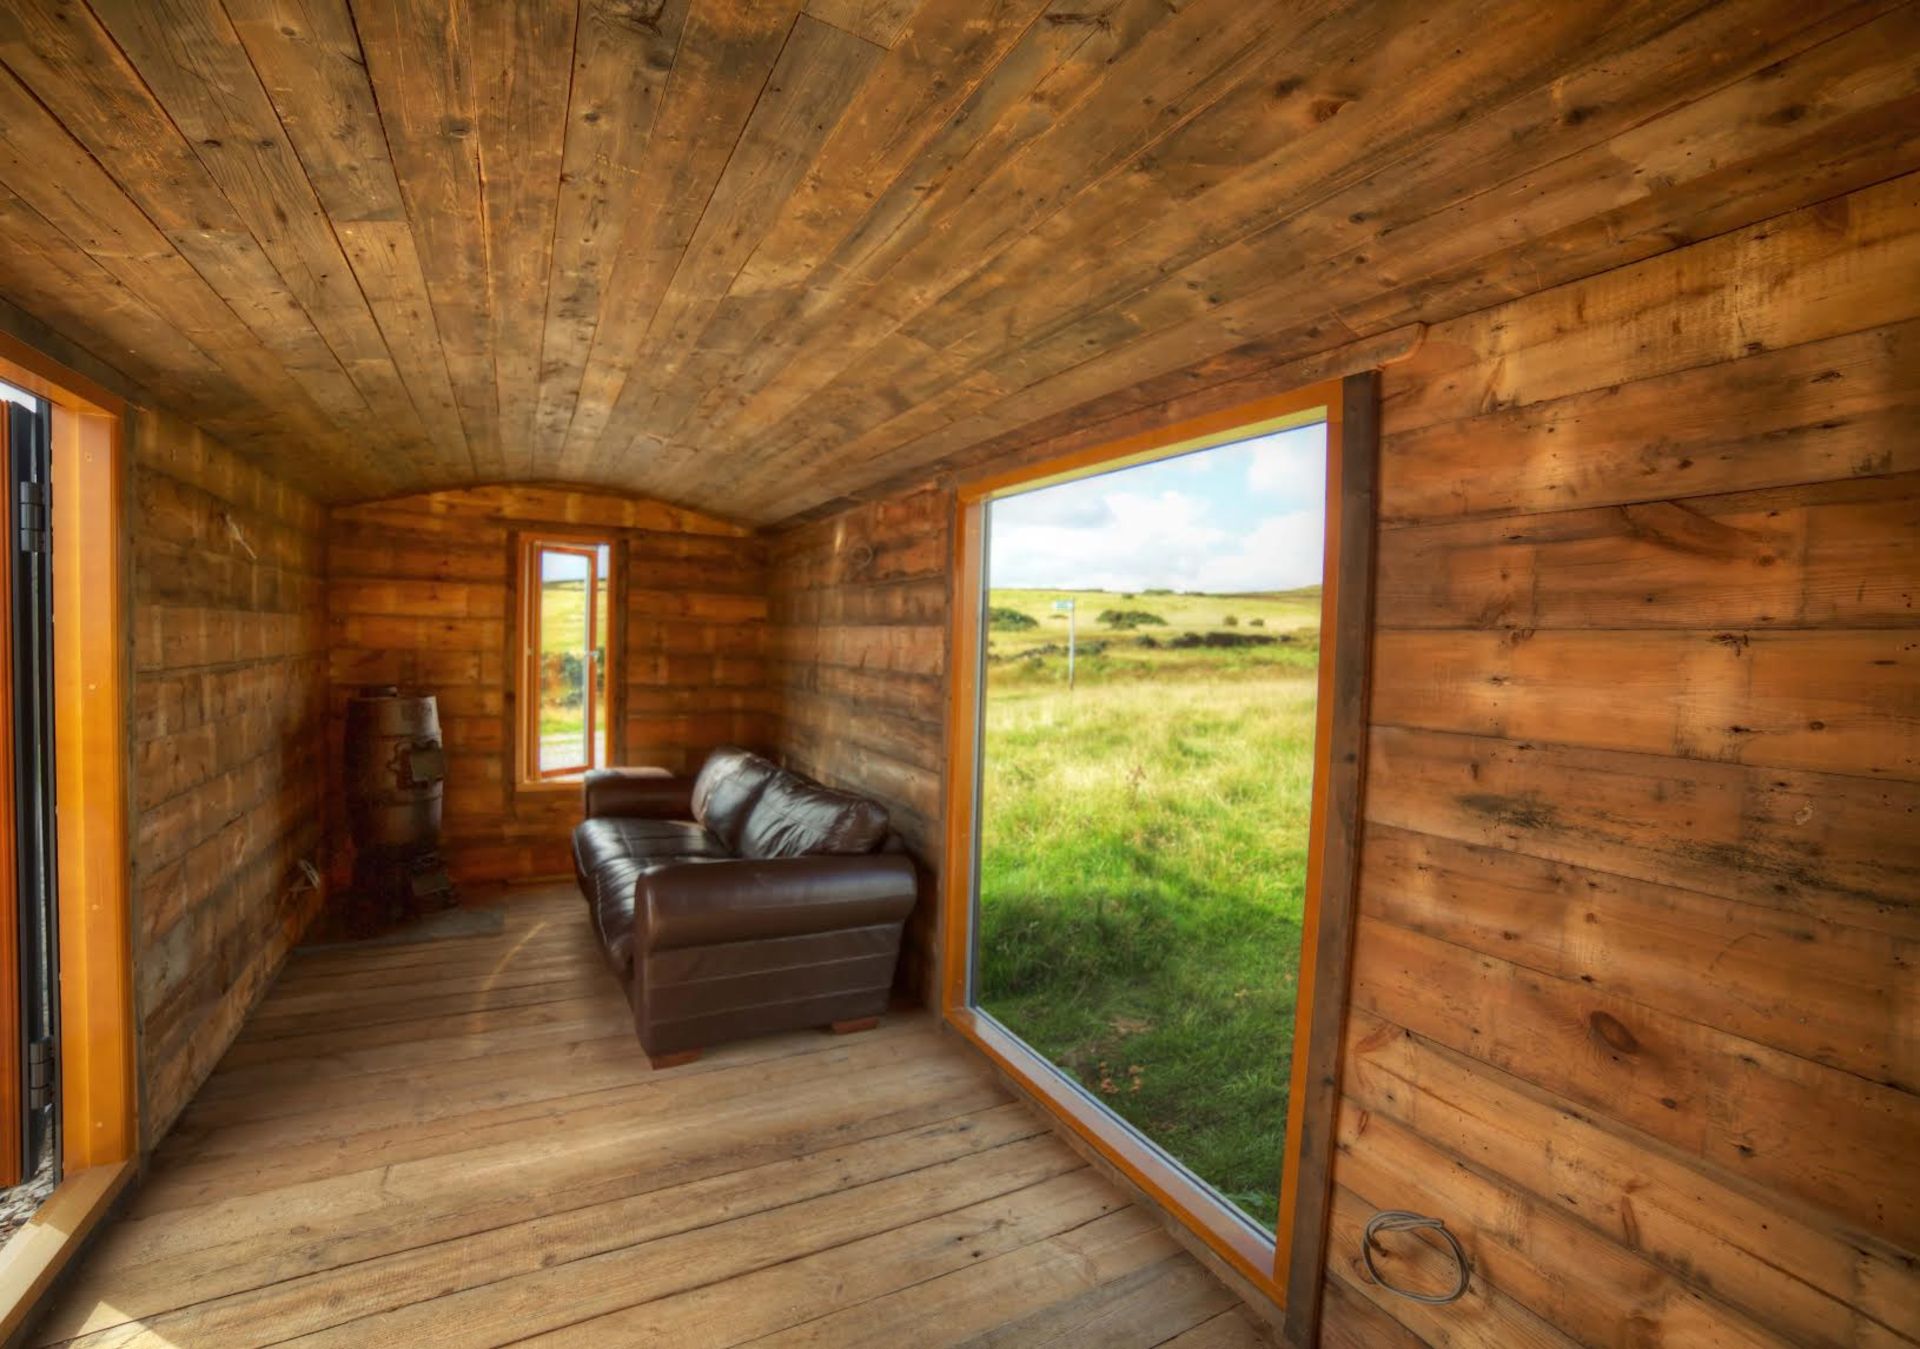 Refurbished Railway carriage, ideal for accommodation, shoot cabin, office, garden room. - Image 4 of 5